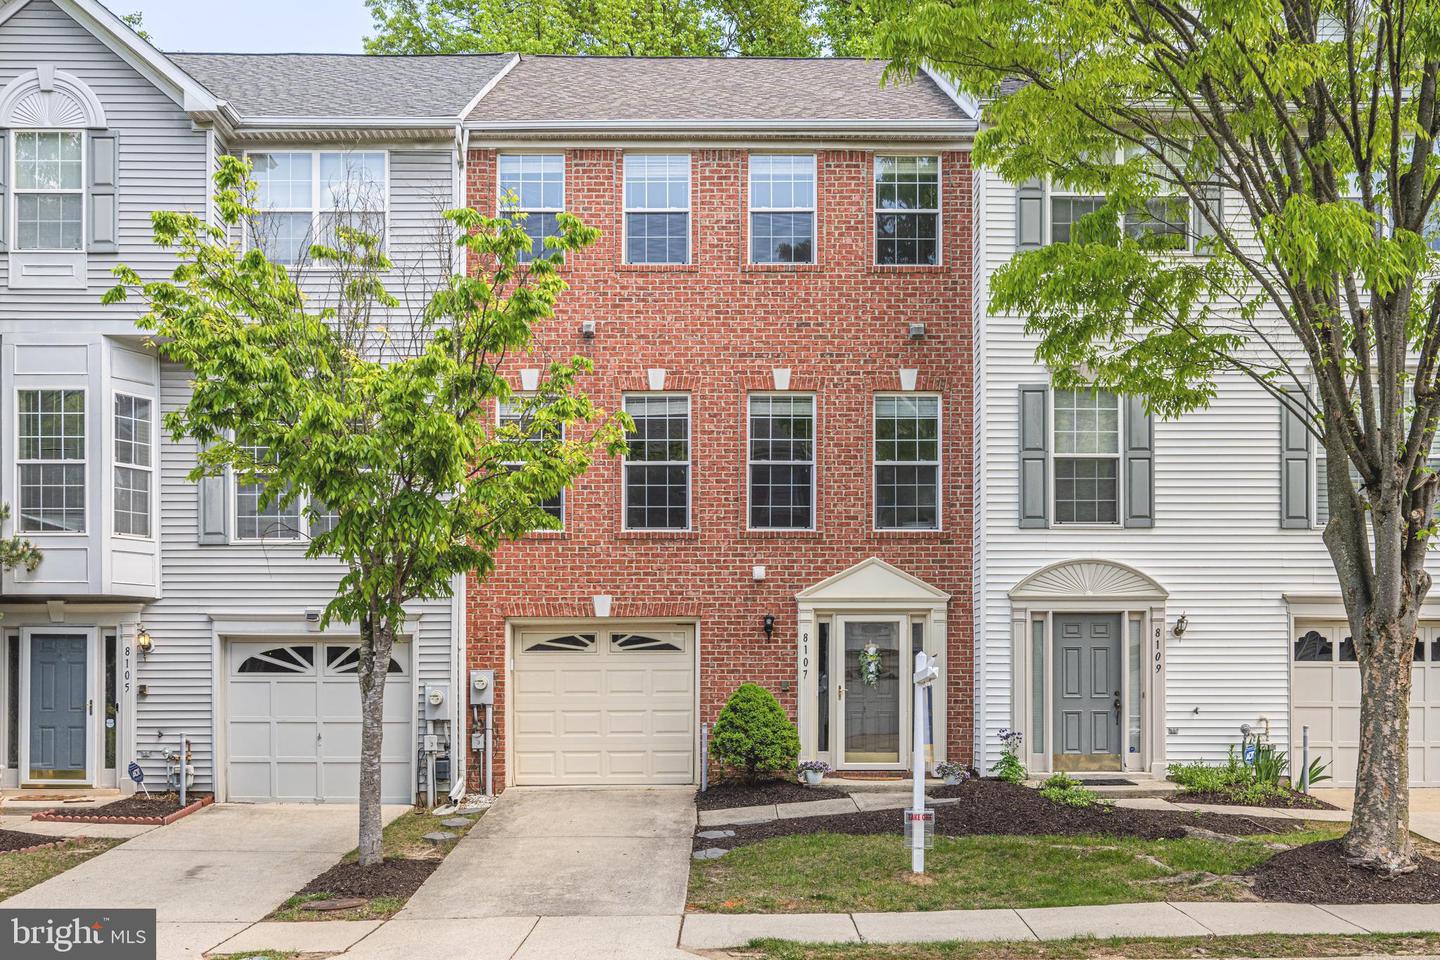 View Laurel, MD 20724 townhome